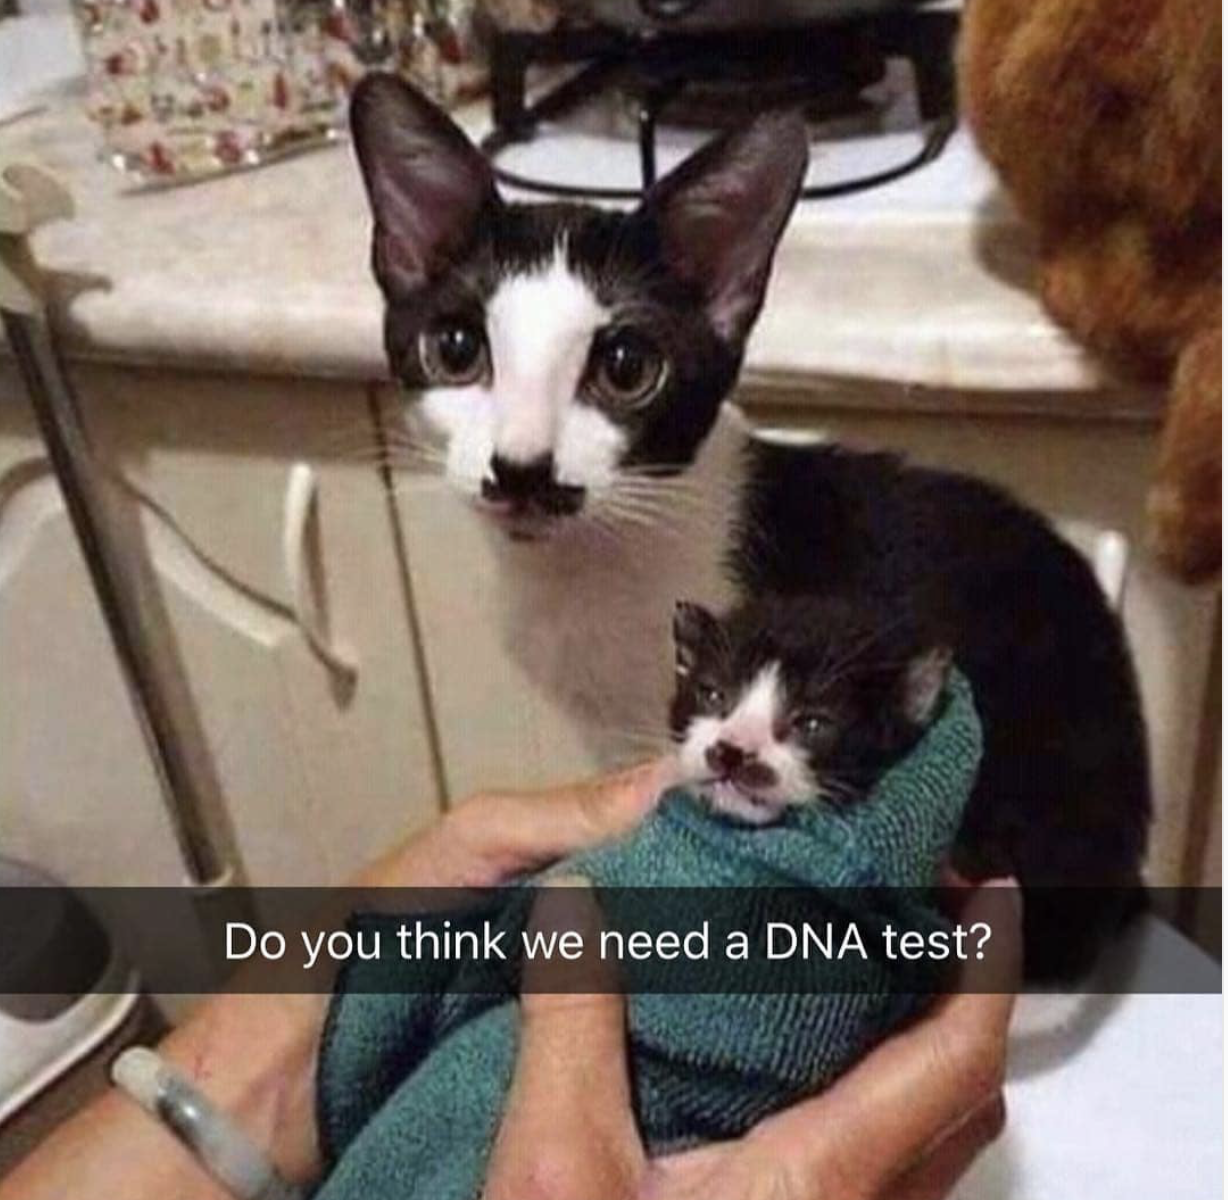 dna test isn t necessary - Do you think we need a Dna test?